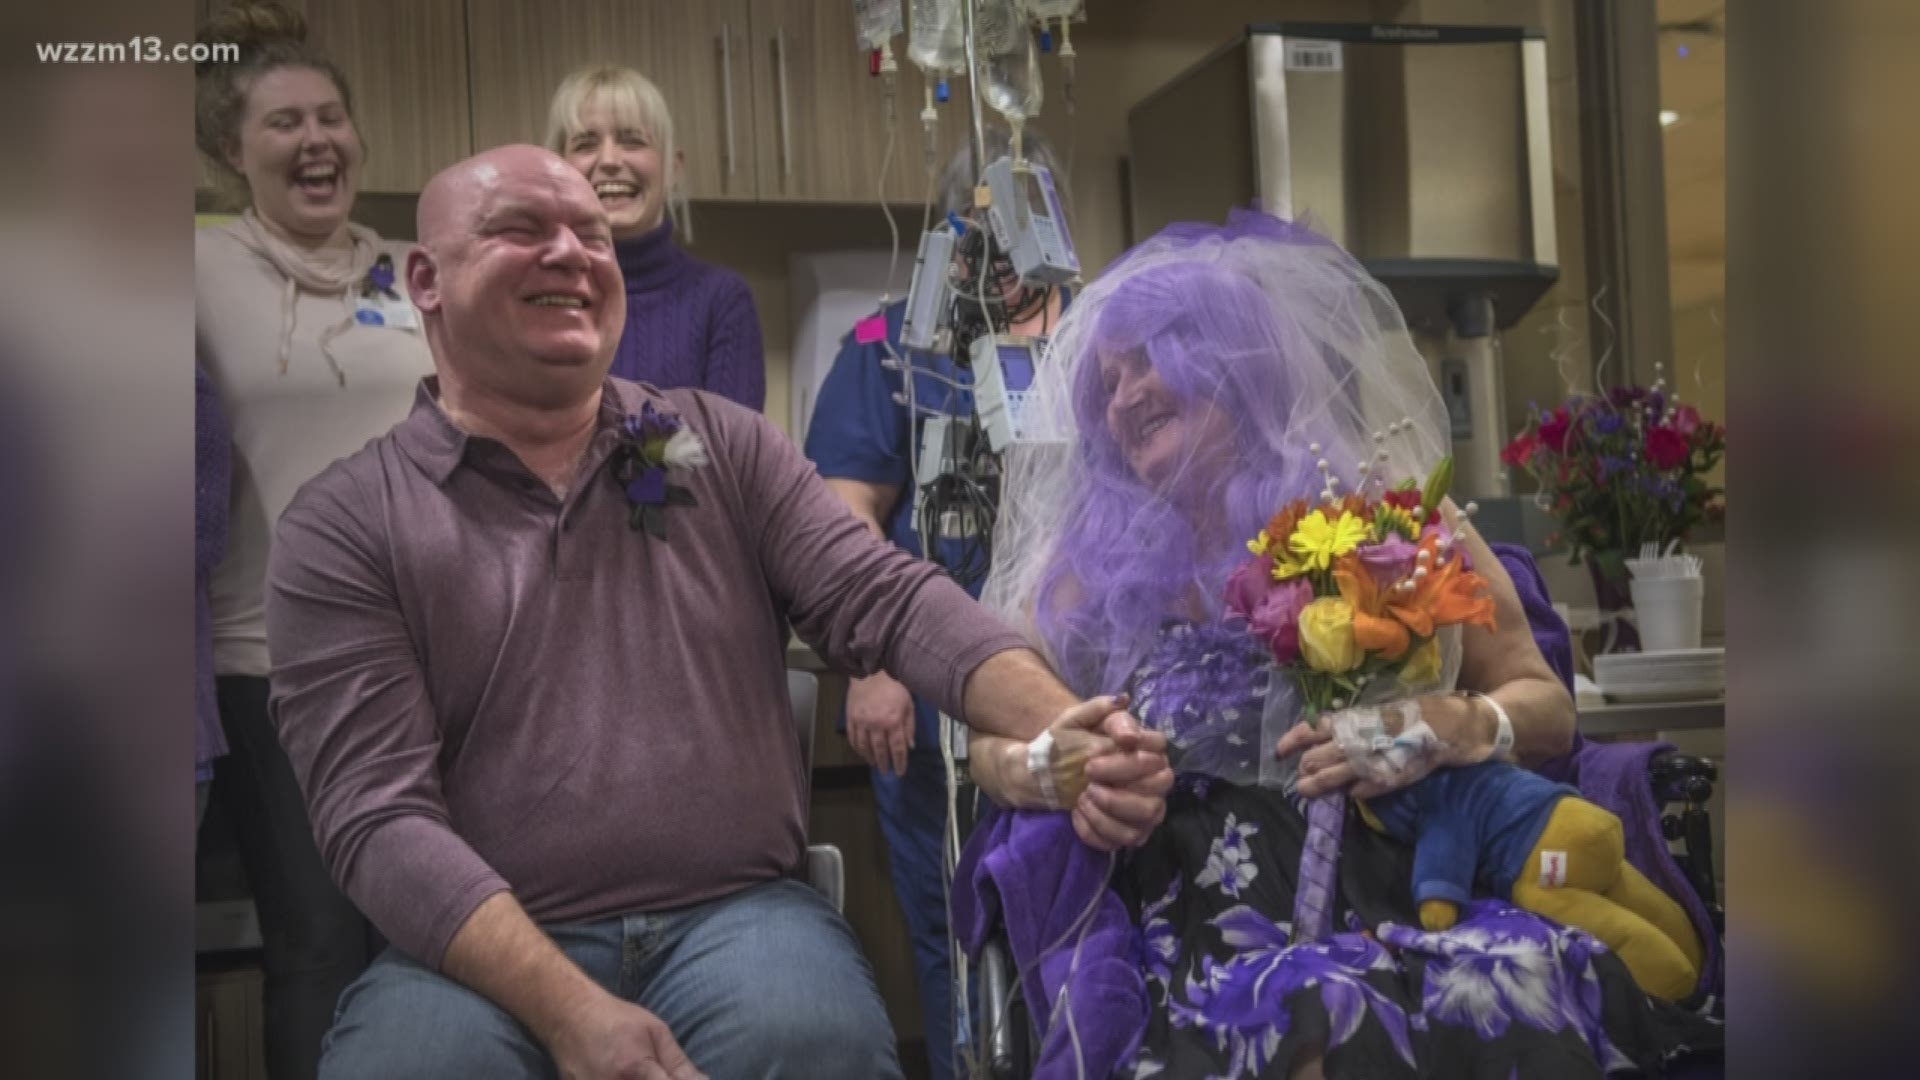 Woman suffering from cancer dies three days after wedding